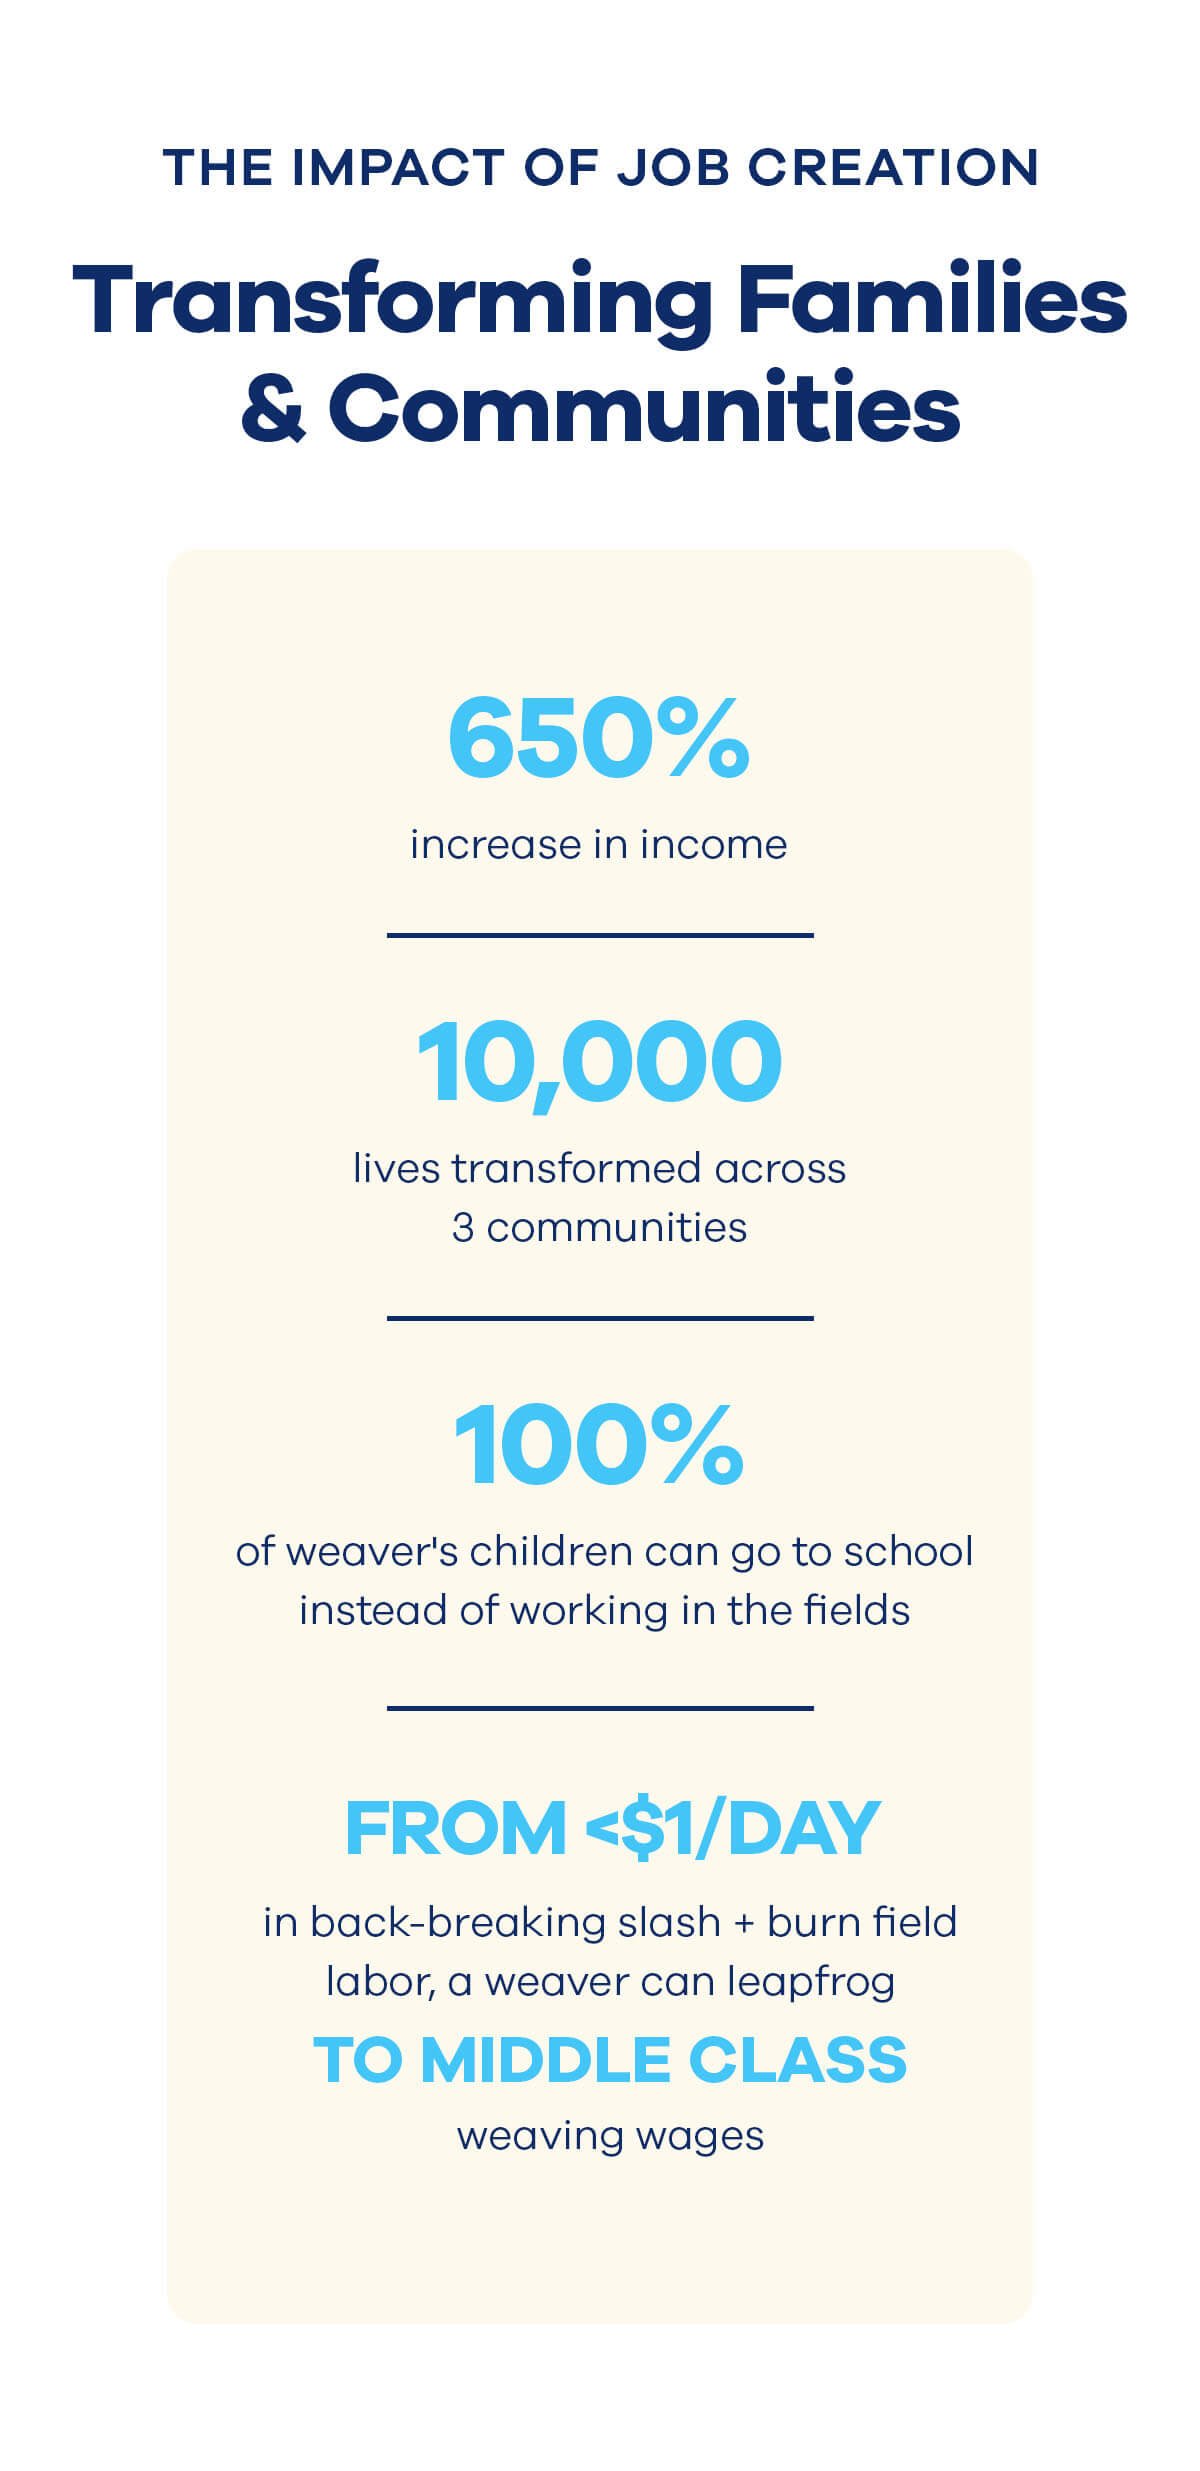 THE IMPACT OF JOB CREATION Transforming Families & Communities 650% increase in income 10,000 lives transformed across 3 communities 100% of weaver's children can go to school instead of working in the fields FROM <\\$1/DAY in back-breaking slash + burn field labor, a weaver can leapfrog to MIDDLE CLASS weaving wages